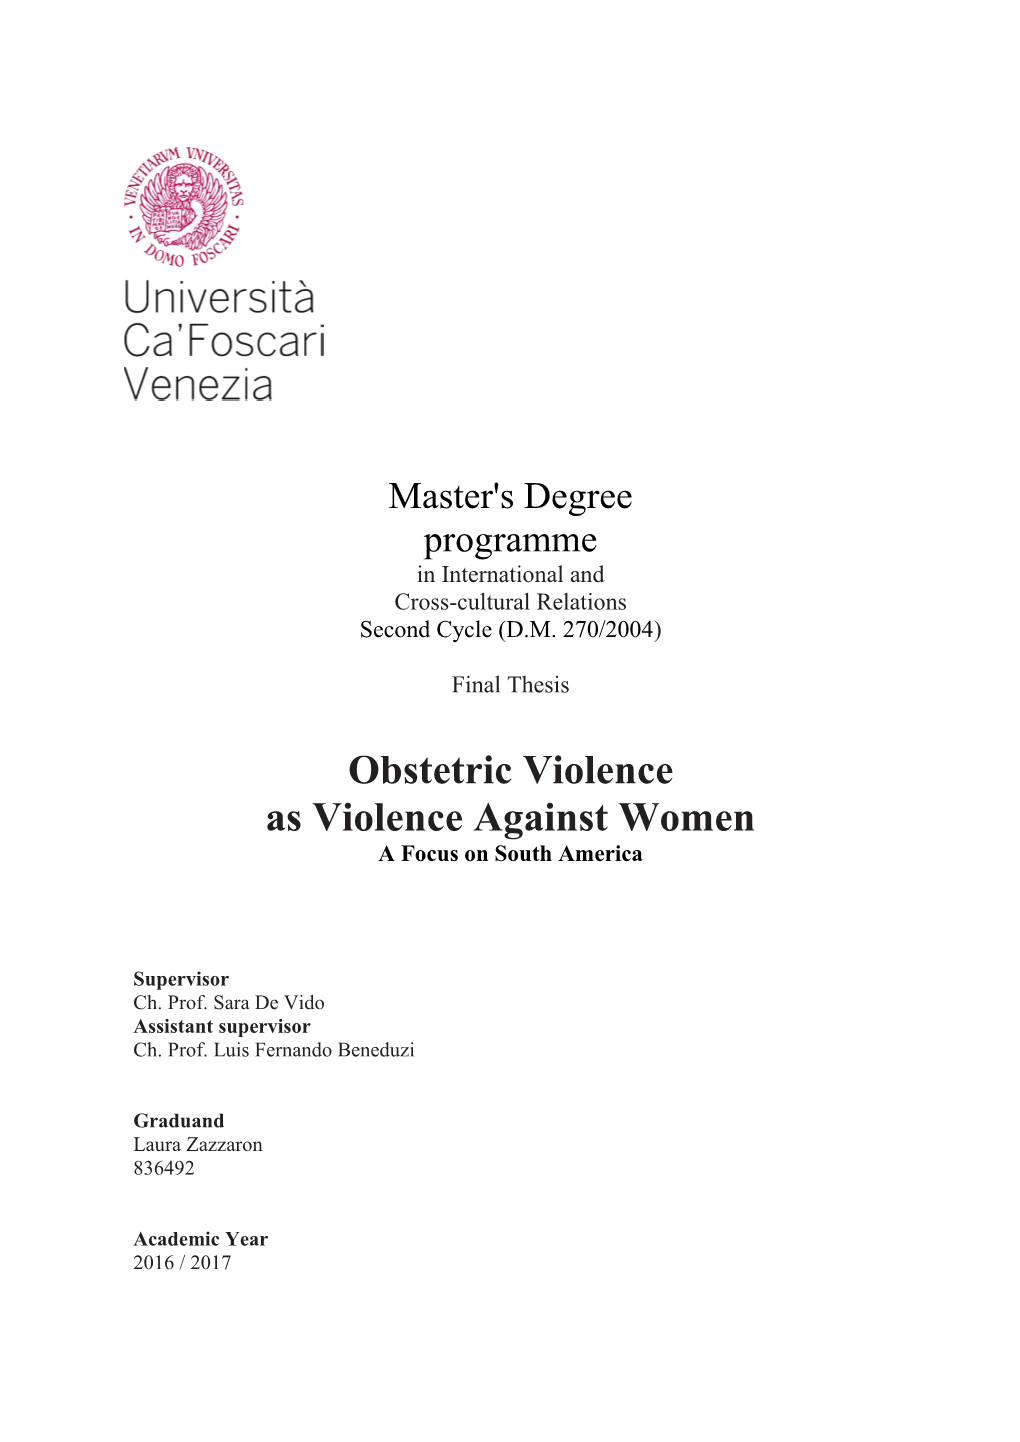 Obstetric Violence As Violence Against Women a Focus on South America